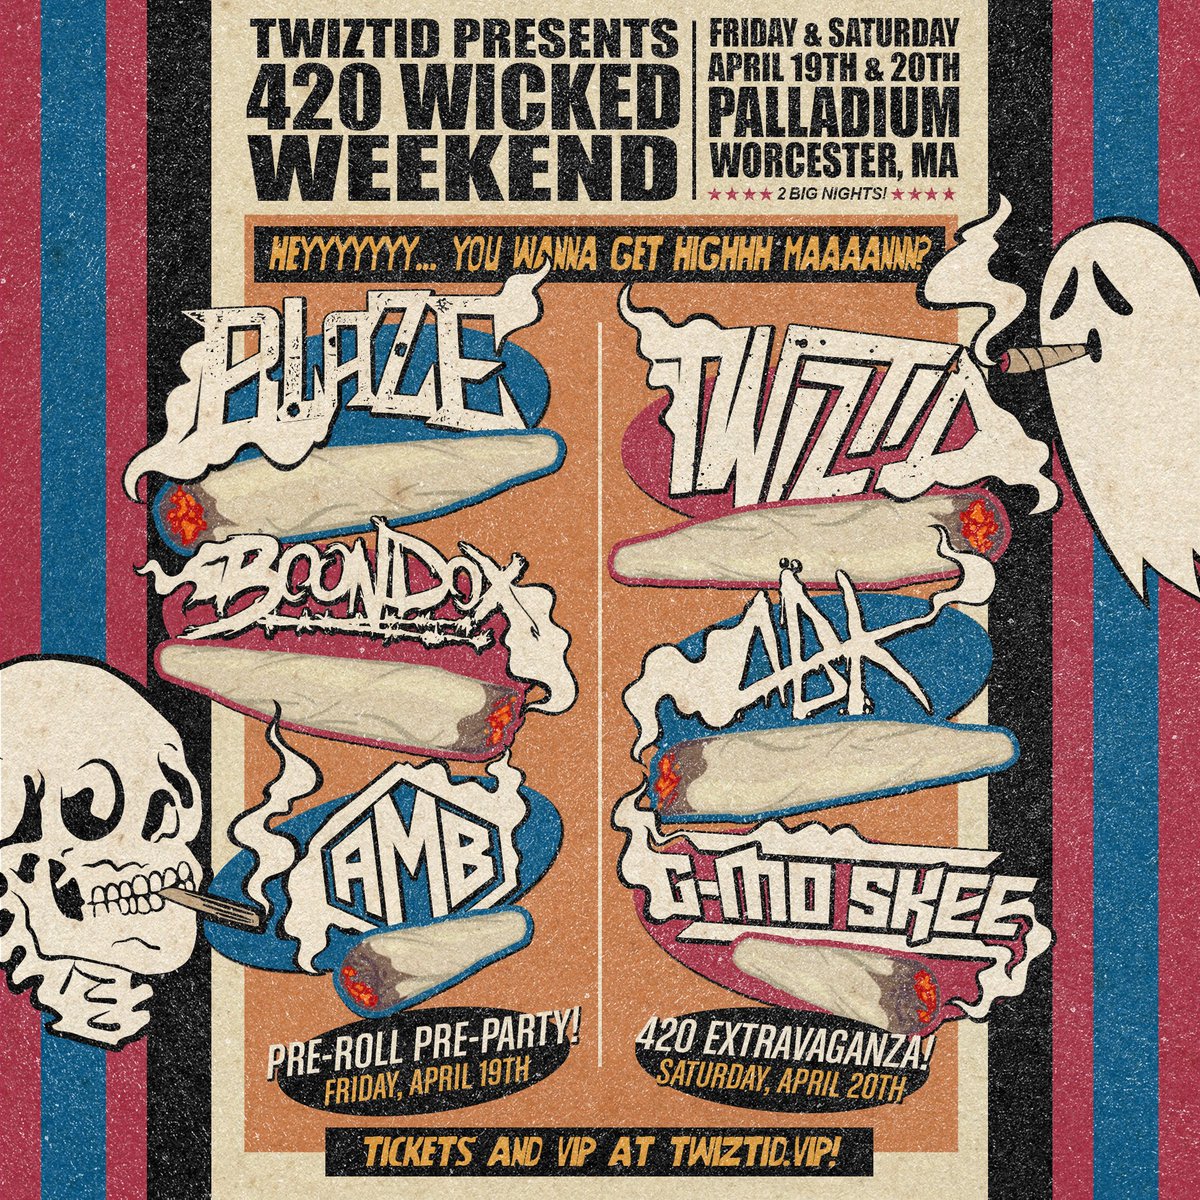 Twiztid Presents 420 Wicked Weekend on 4/19 & 4/20 in Worcester, MA at the Palladium! Pre-sale tickets on sale tomorrow use presale code bagz & general on sale/VIP are available starting Friday at 10am. Ticket link: bit.ly/Twiztid420Worc…  VIP Link: twiztid.vip